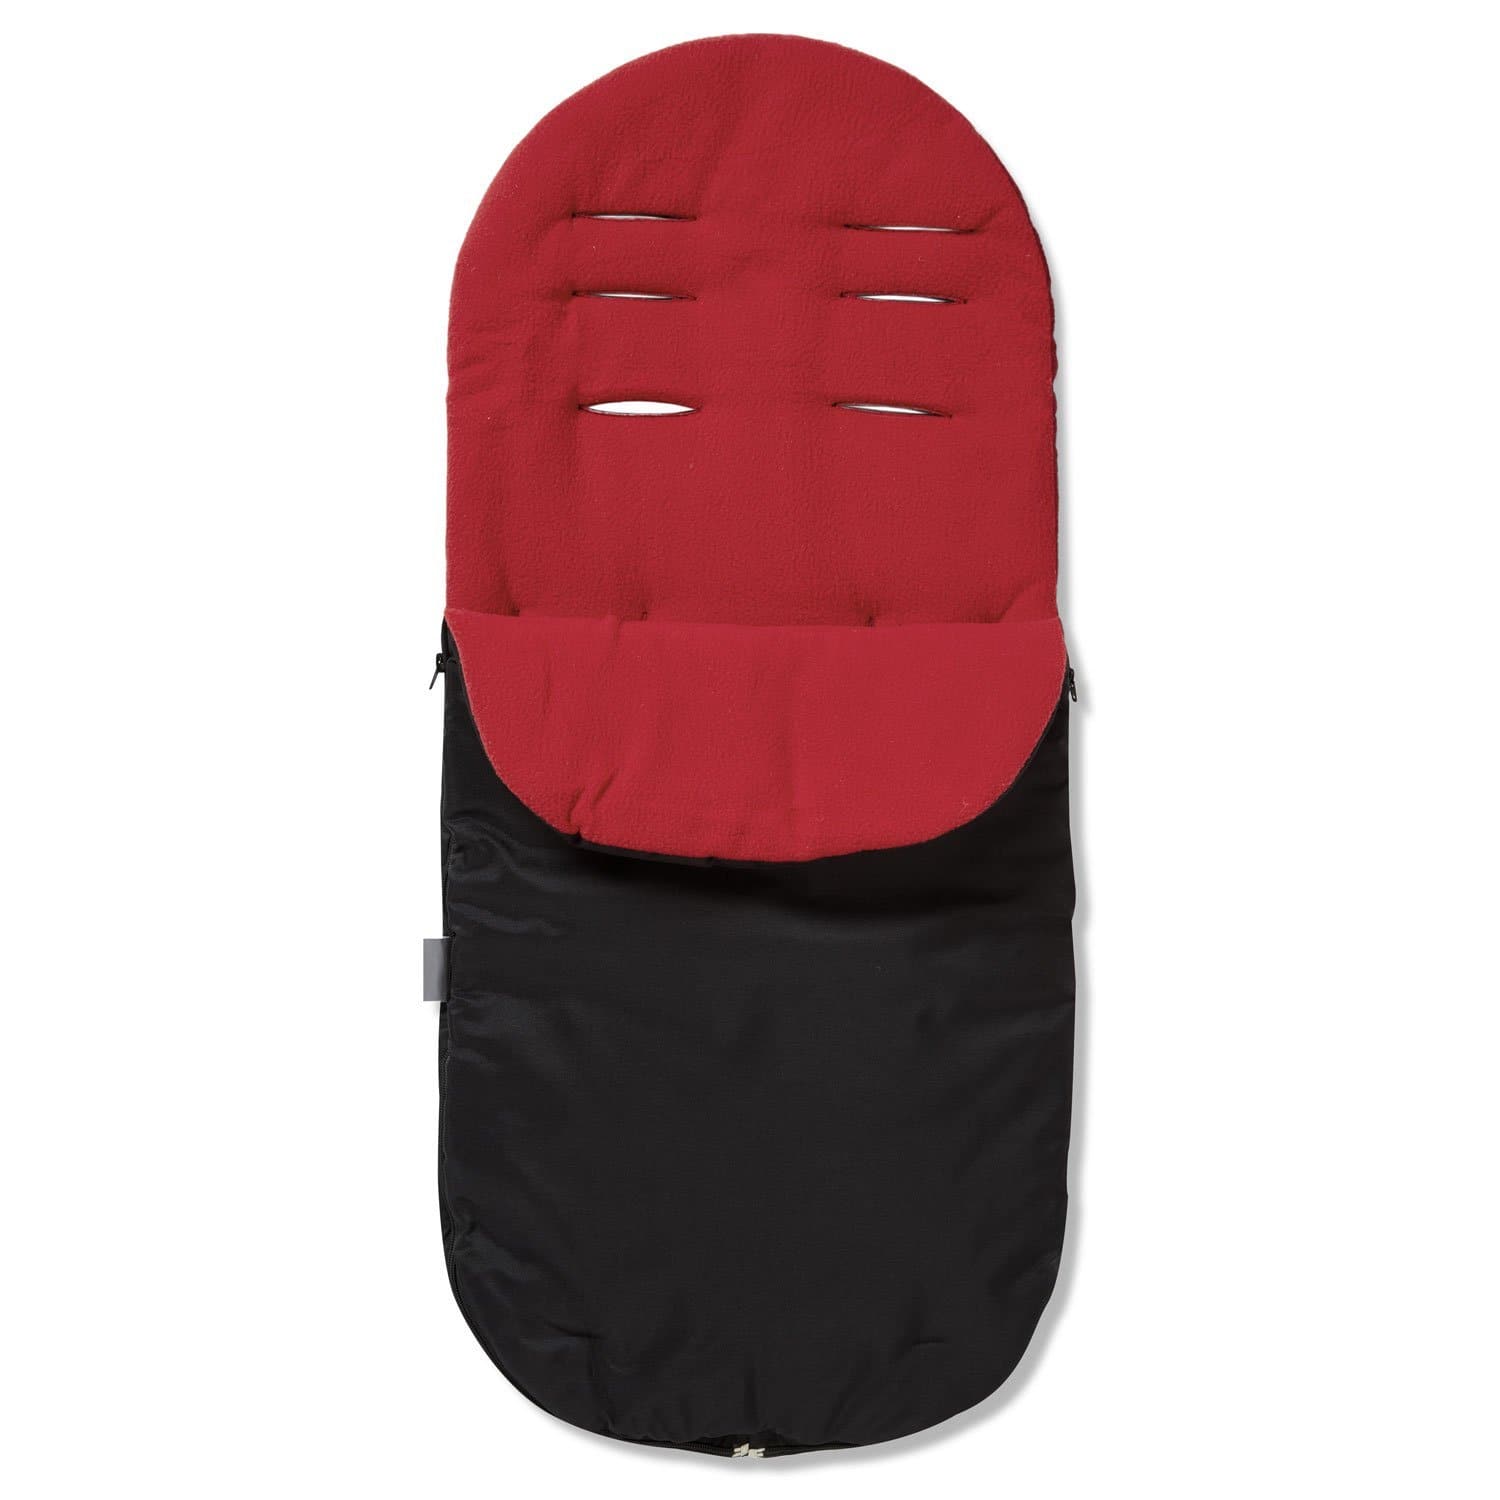 Footmuff / Cosy Toes Compatible with Baby Elegance - Red / Fits All Models | For Your Little One